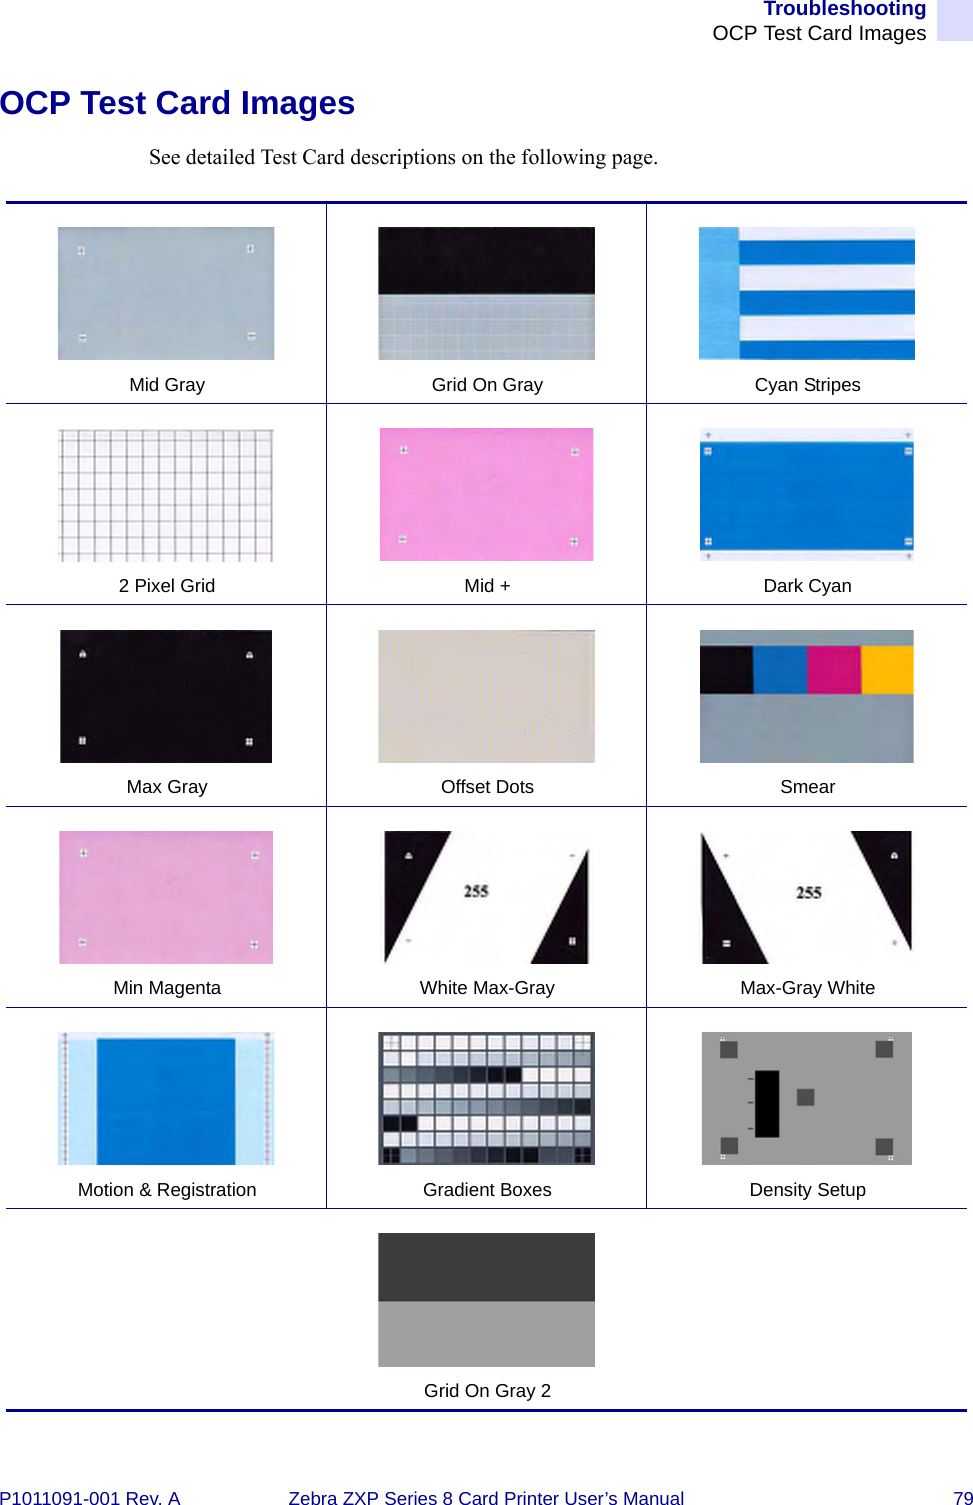 TroubleshootingOCP Test Card ImagesP1011091-001 Rev. A Zebra ZXP Series 8 Card Printer User’s Manual 79OCP Test Card ImagesSee detailed Test Card descriptions on the following page.Mid Gray Grid On Gray Cyan Stripes2 Pixel Grid Mid + Dark CyanMax Gray Offset Dots SmearMin Magenta White Max-Gray Max-Gray WhiteMotion &amp; Registration Gradient Boxes Density SetupGrid On Gray 2